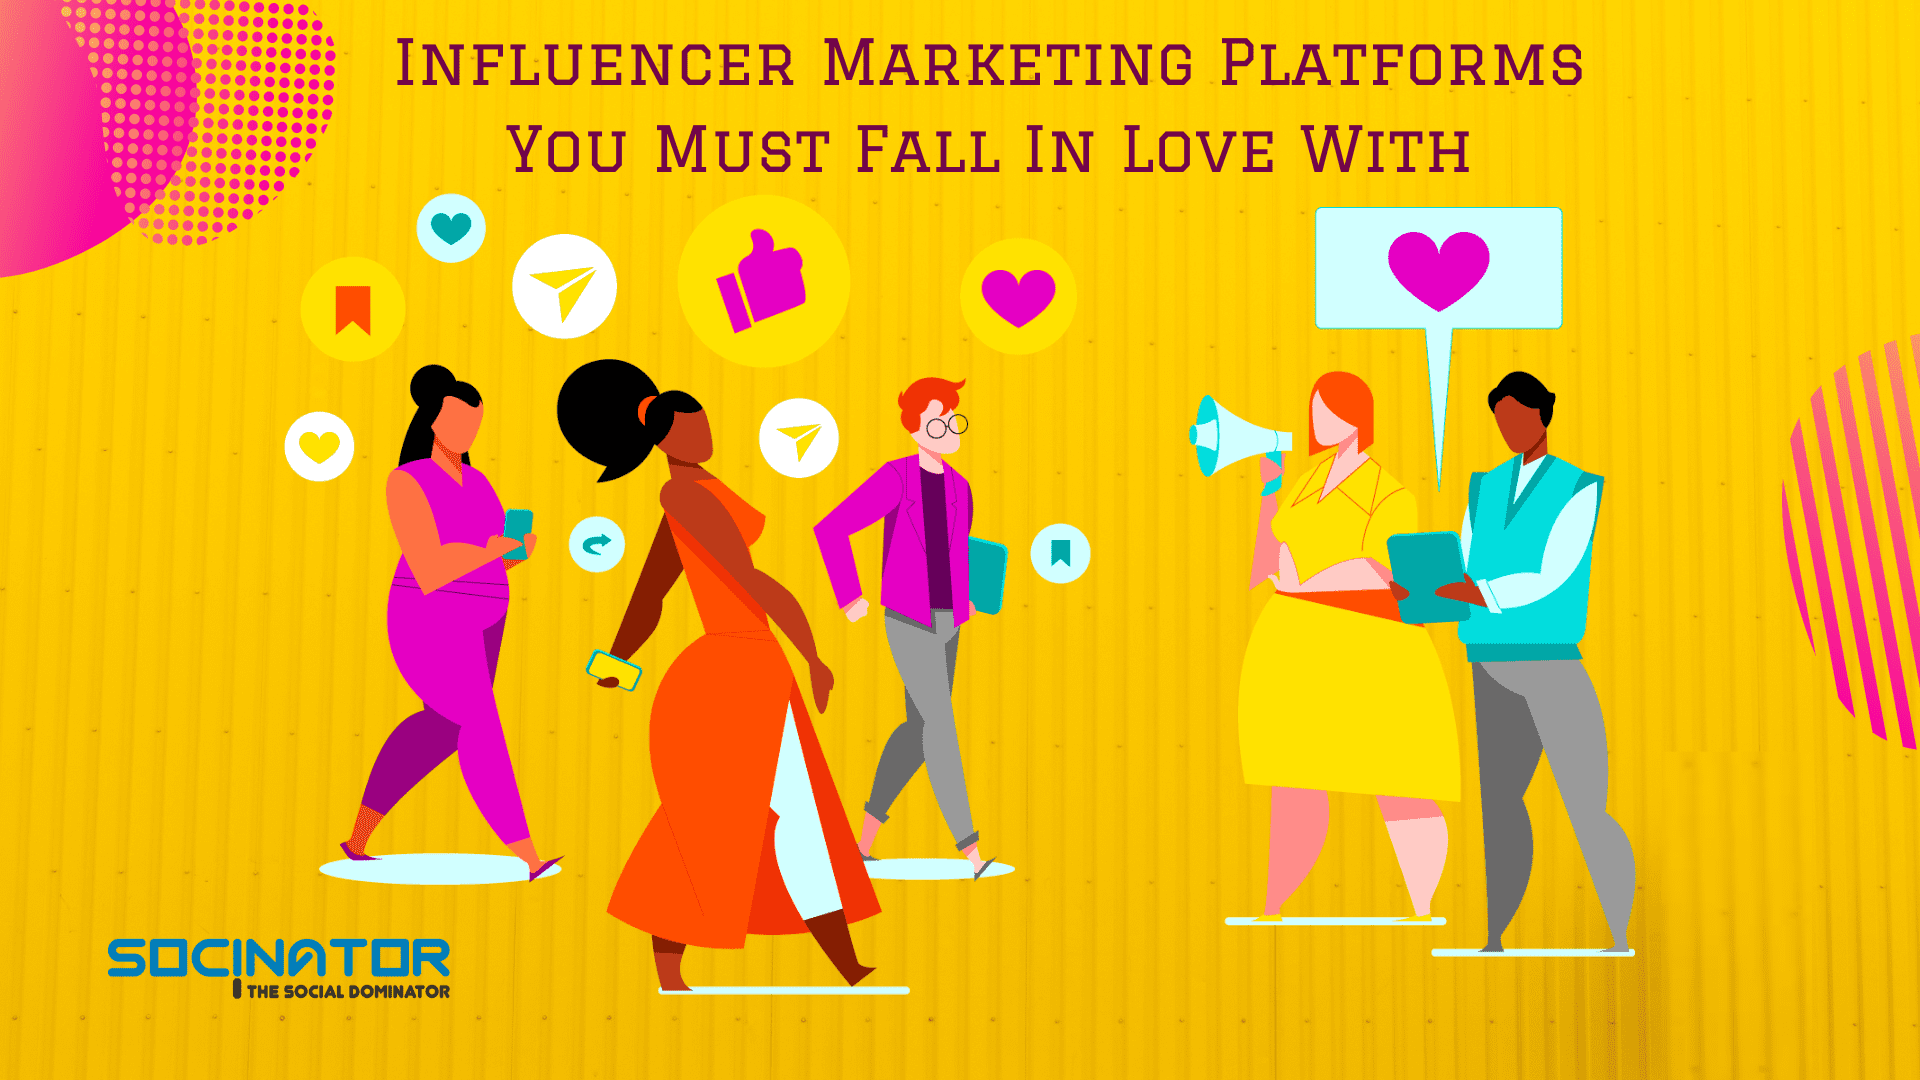 Top 5 Influencer Marketing Platforms You Must Fall In Love With